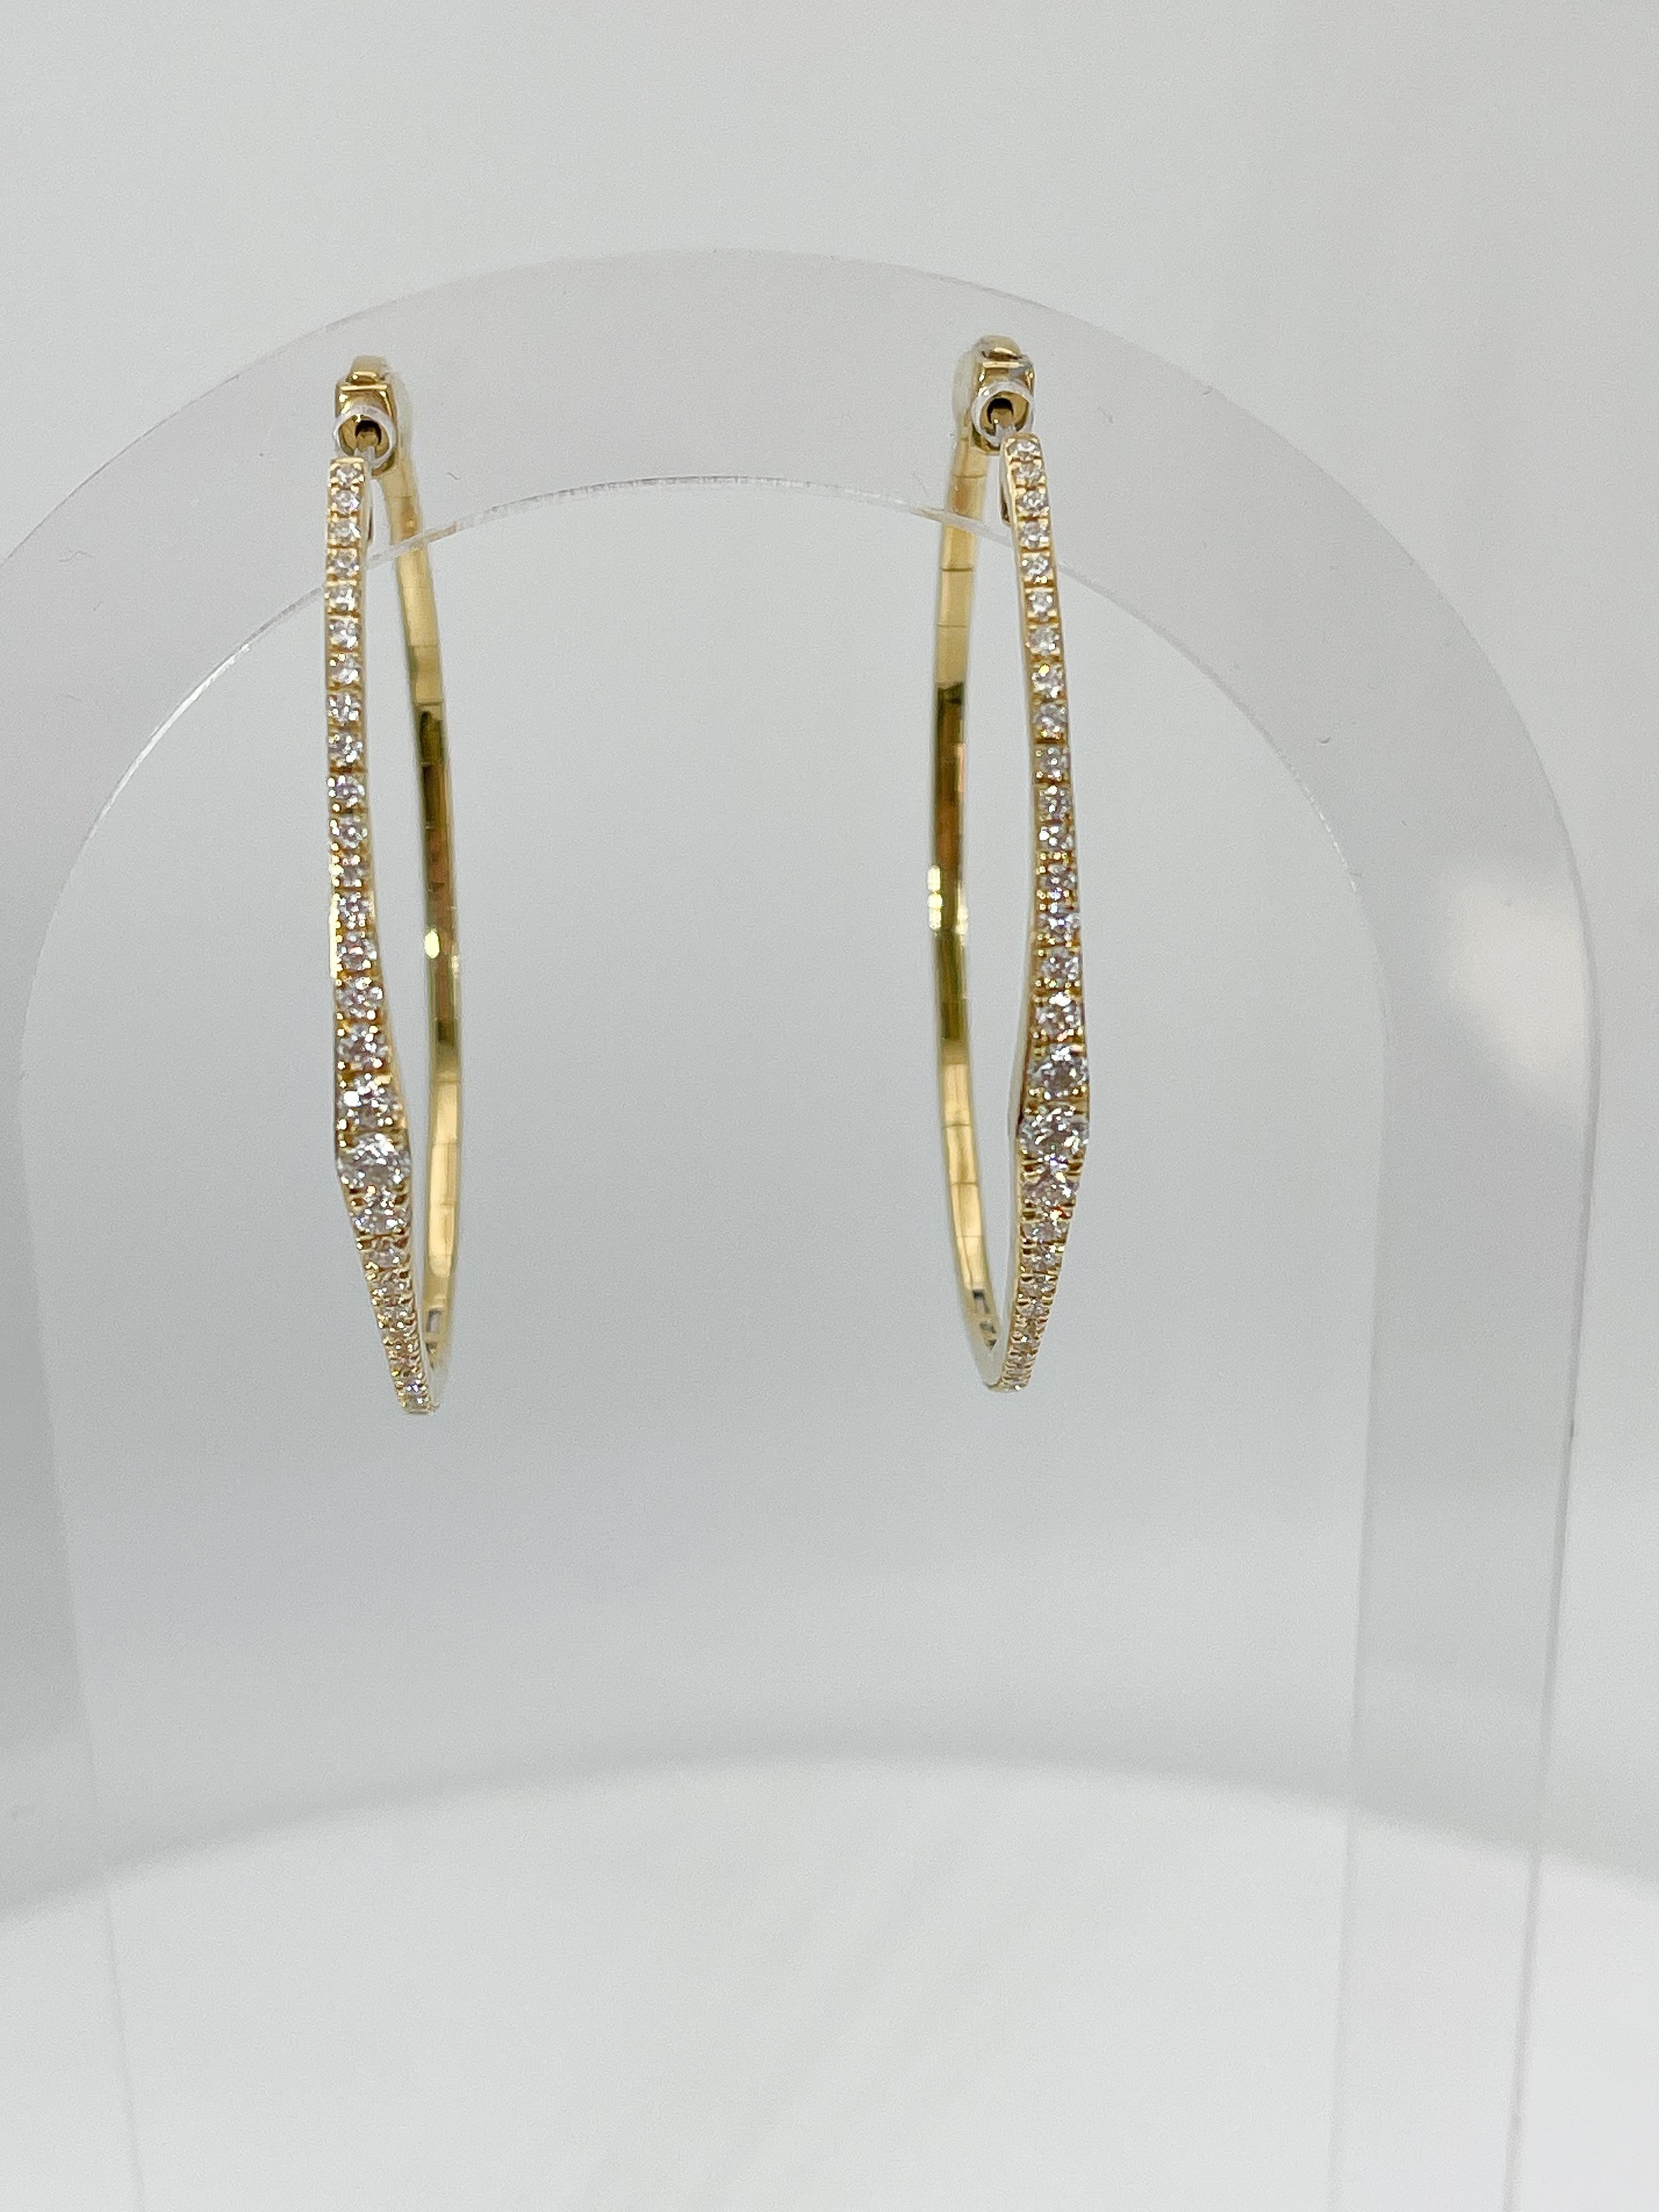 Simon G 18k yellow gold 1.16 CTW diamond hoops. The diamonds in these earrings are all round, the measurements are 44.6 x 39.5 mm, and they have a total weight of 10.3.
Part number- LE4651